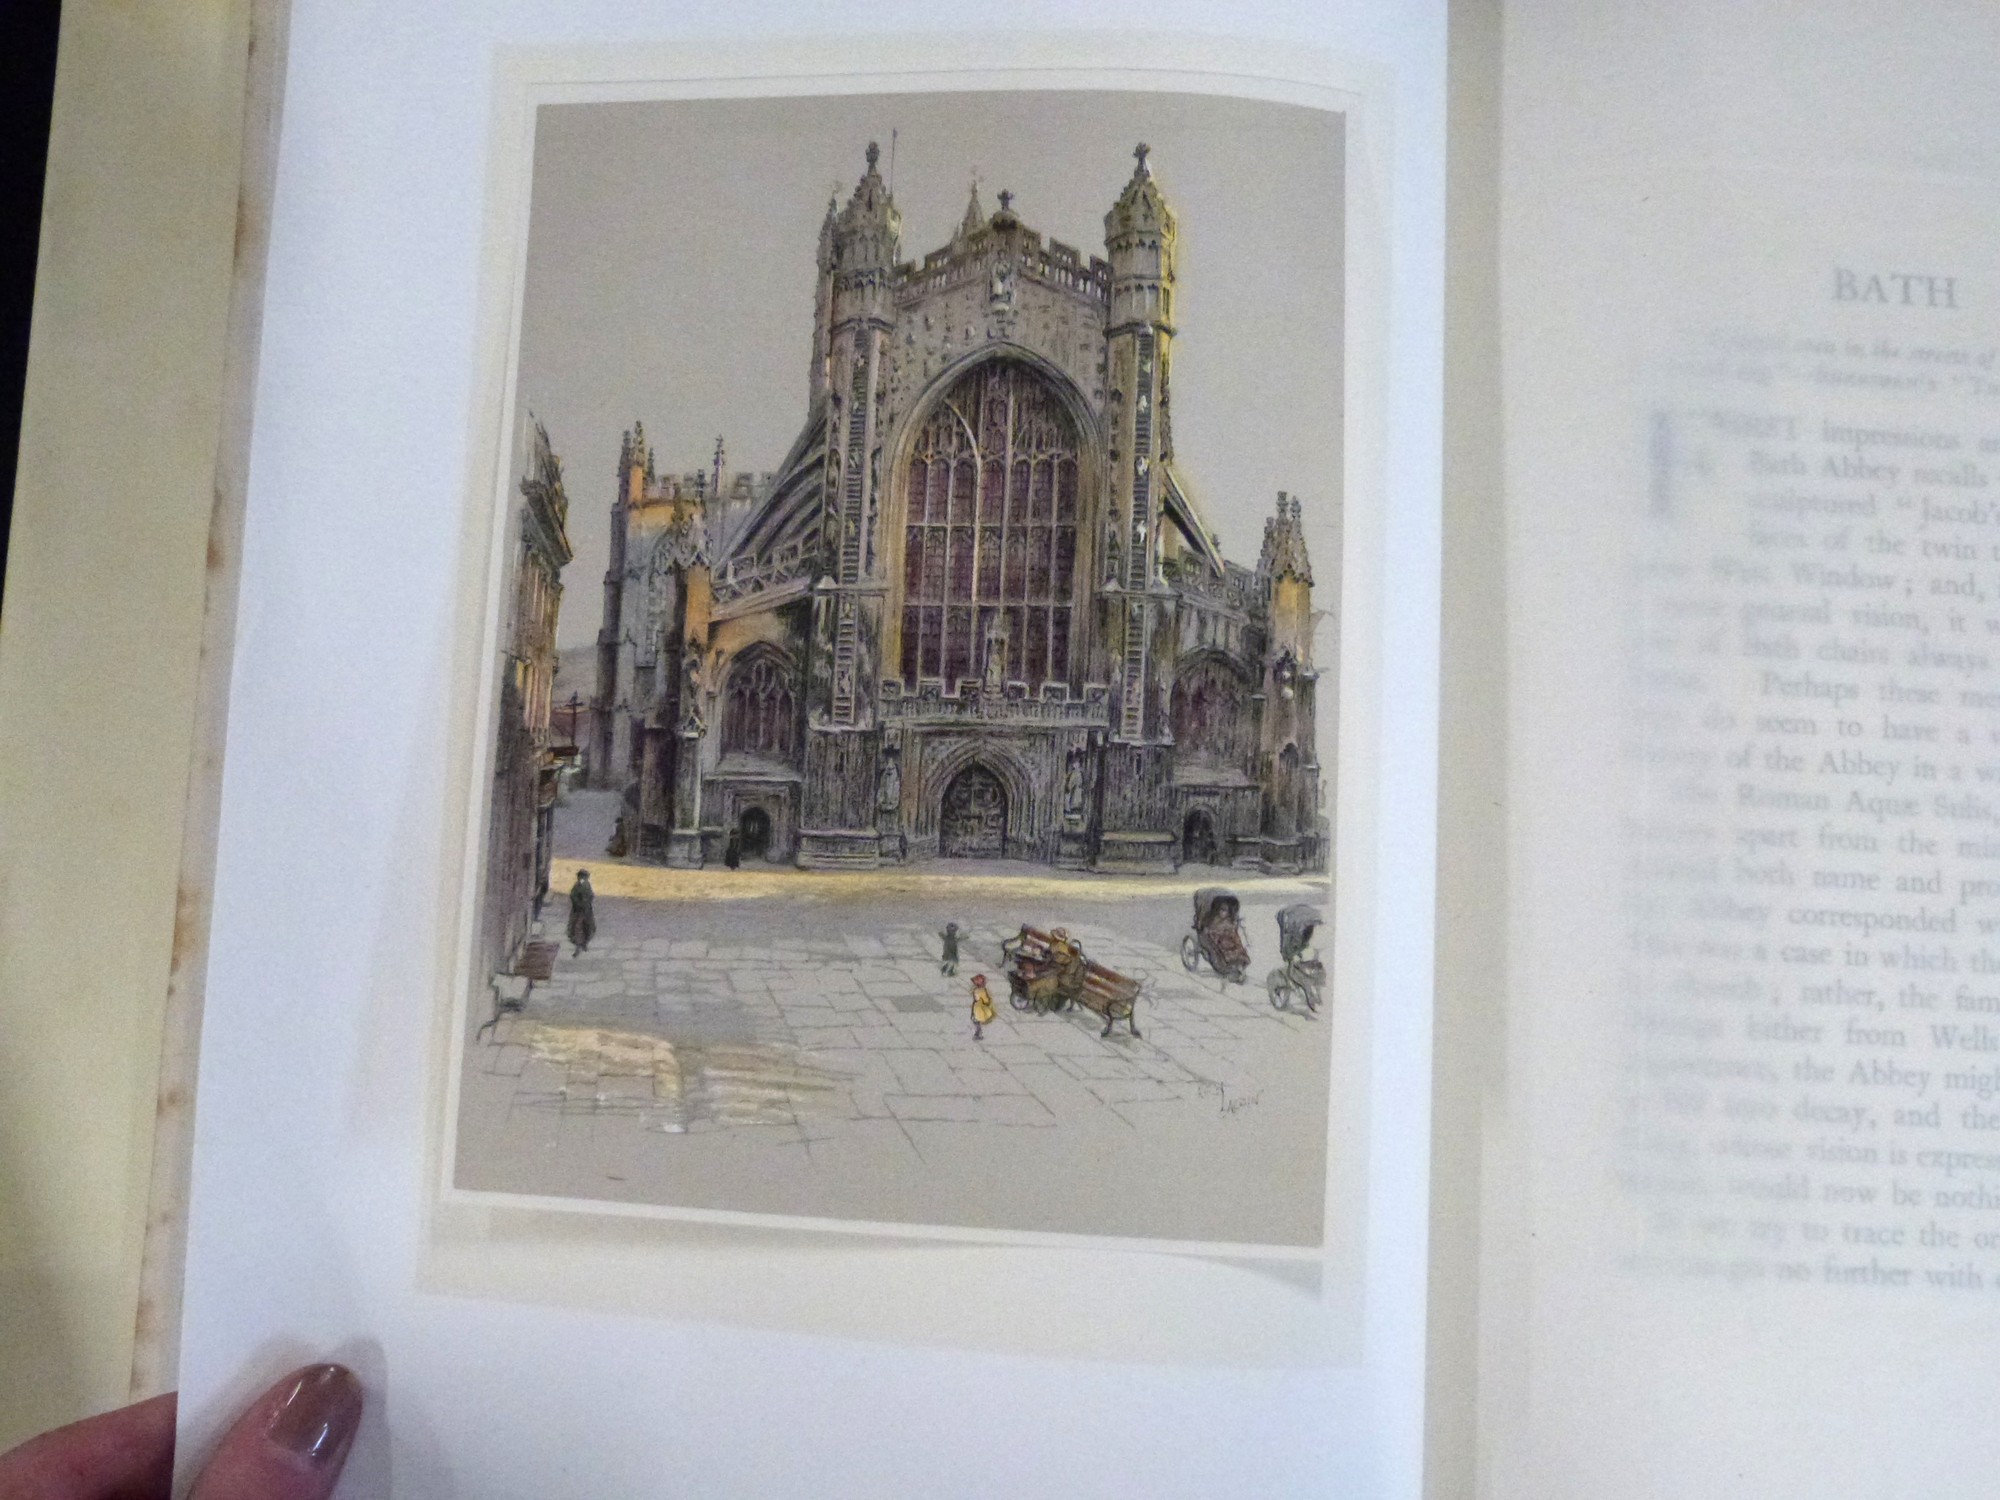 CECIL ALDIN: CATHEDRALS OF ENGLAND, London, Eyre & Spottiswoode [1924] (375) (350) numbered (120) - Image 4 of 6